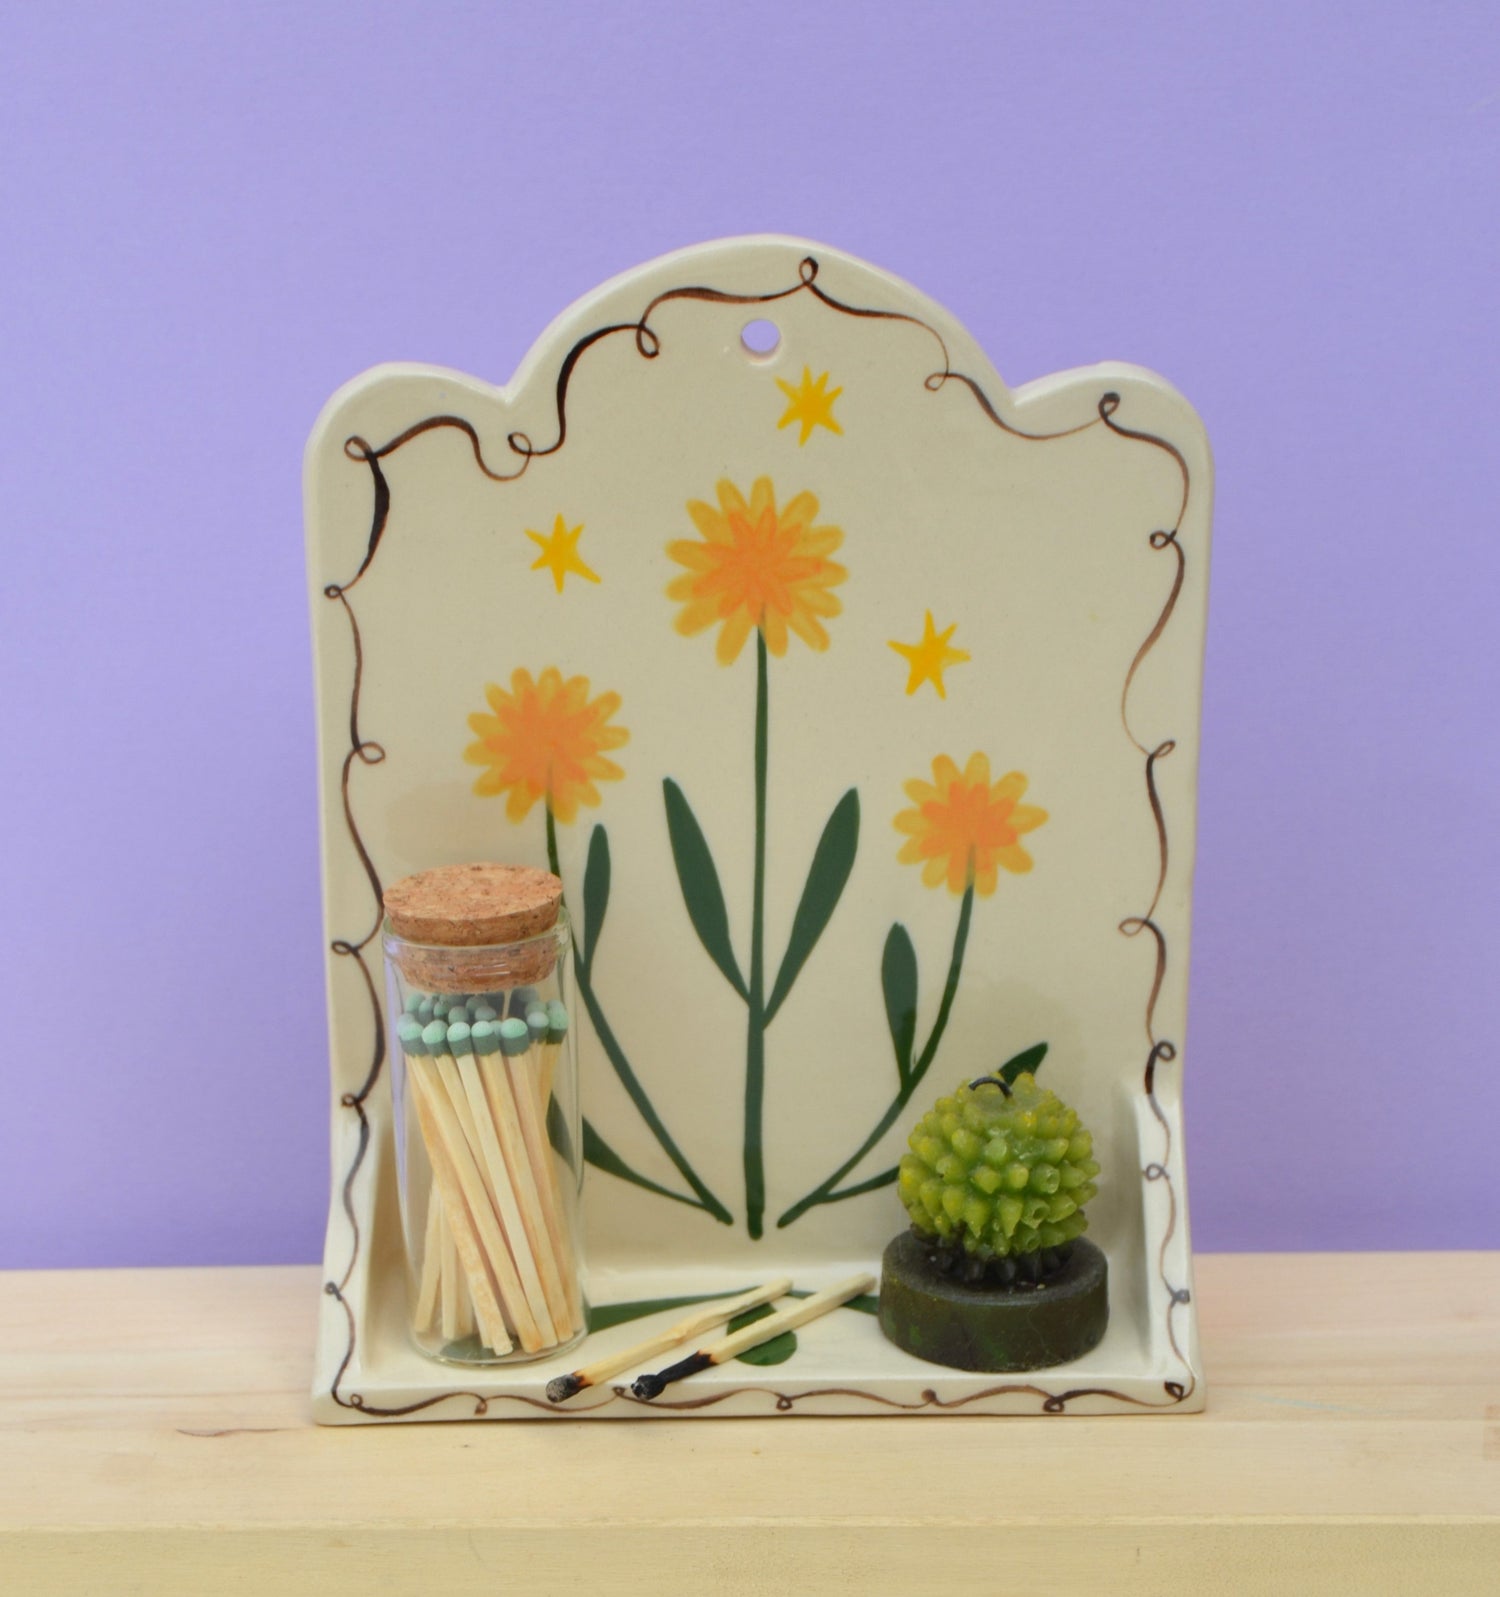 Ceramic hanging altar with illustrative dandelion design. Shelf has a jar of matches and a little cactus displayed on it.